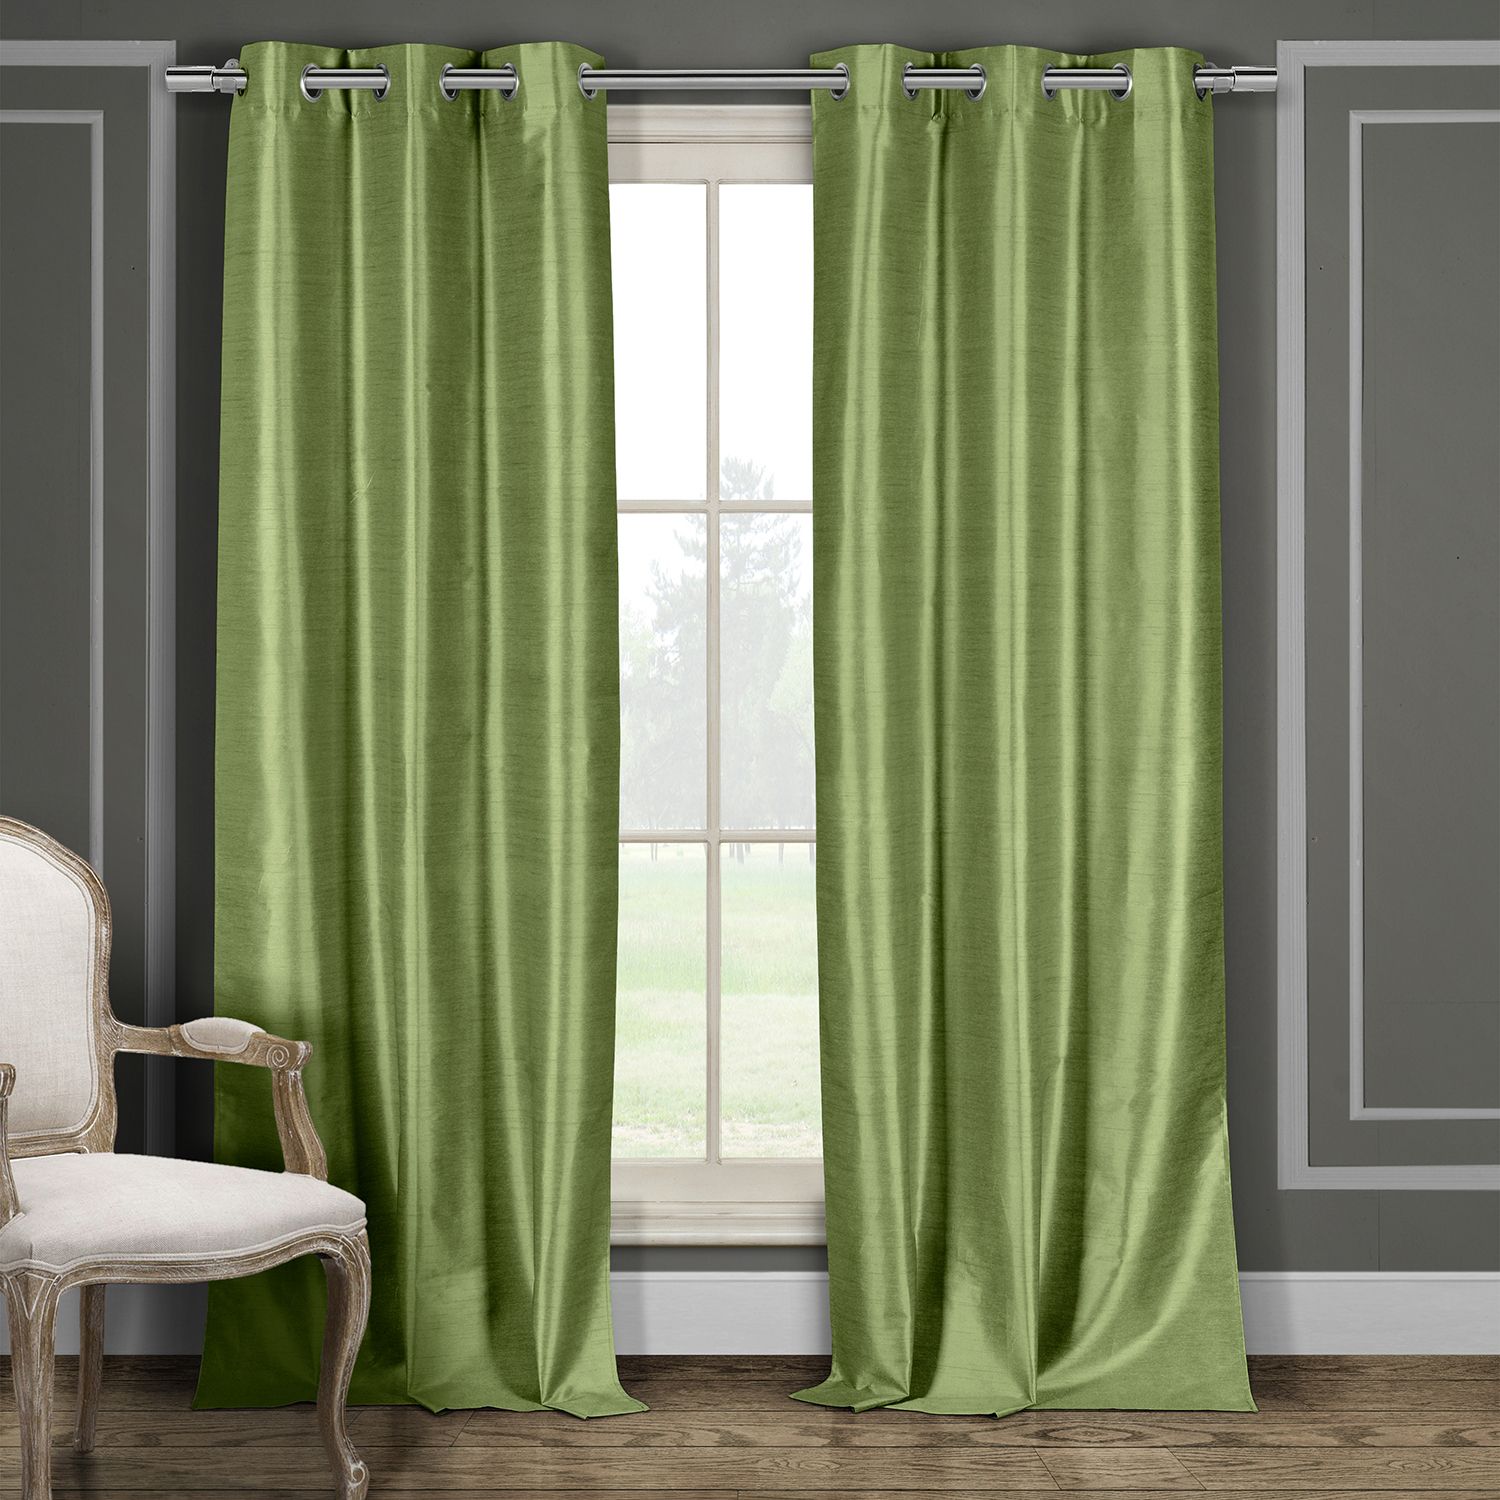 Image for Duck River Textile Daenerys Solid Blackout Window Curtain Set at Kohl's.